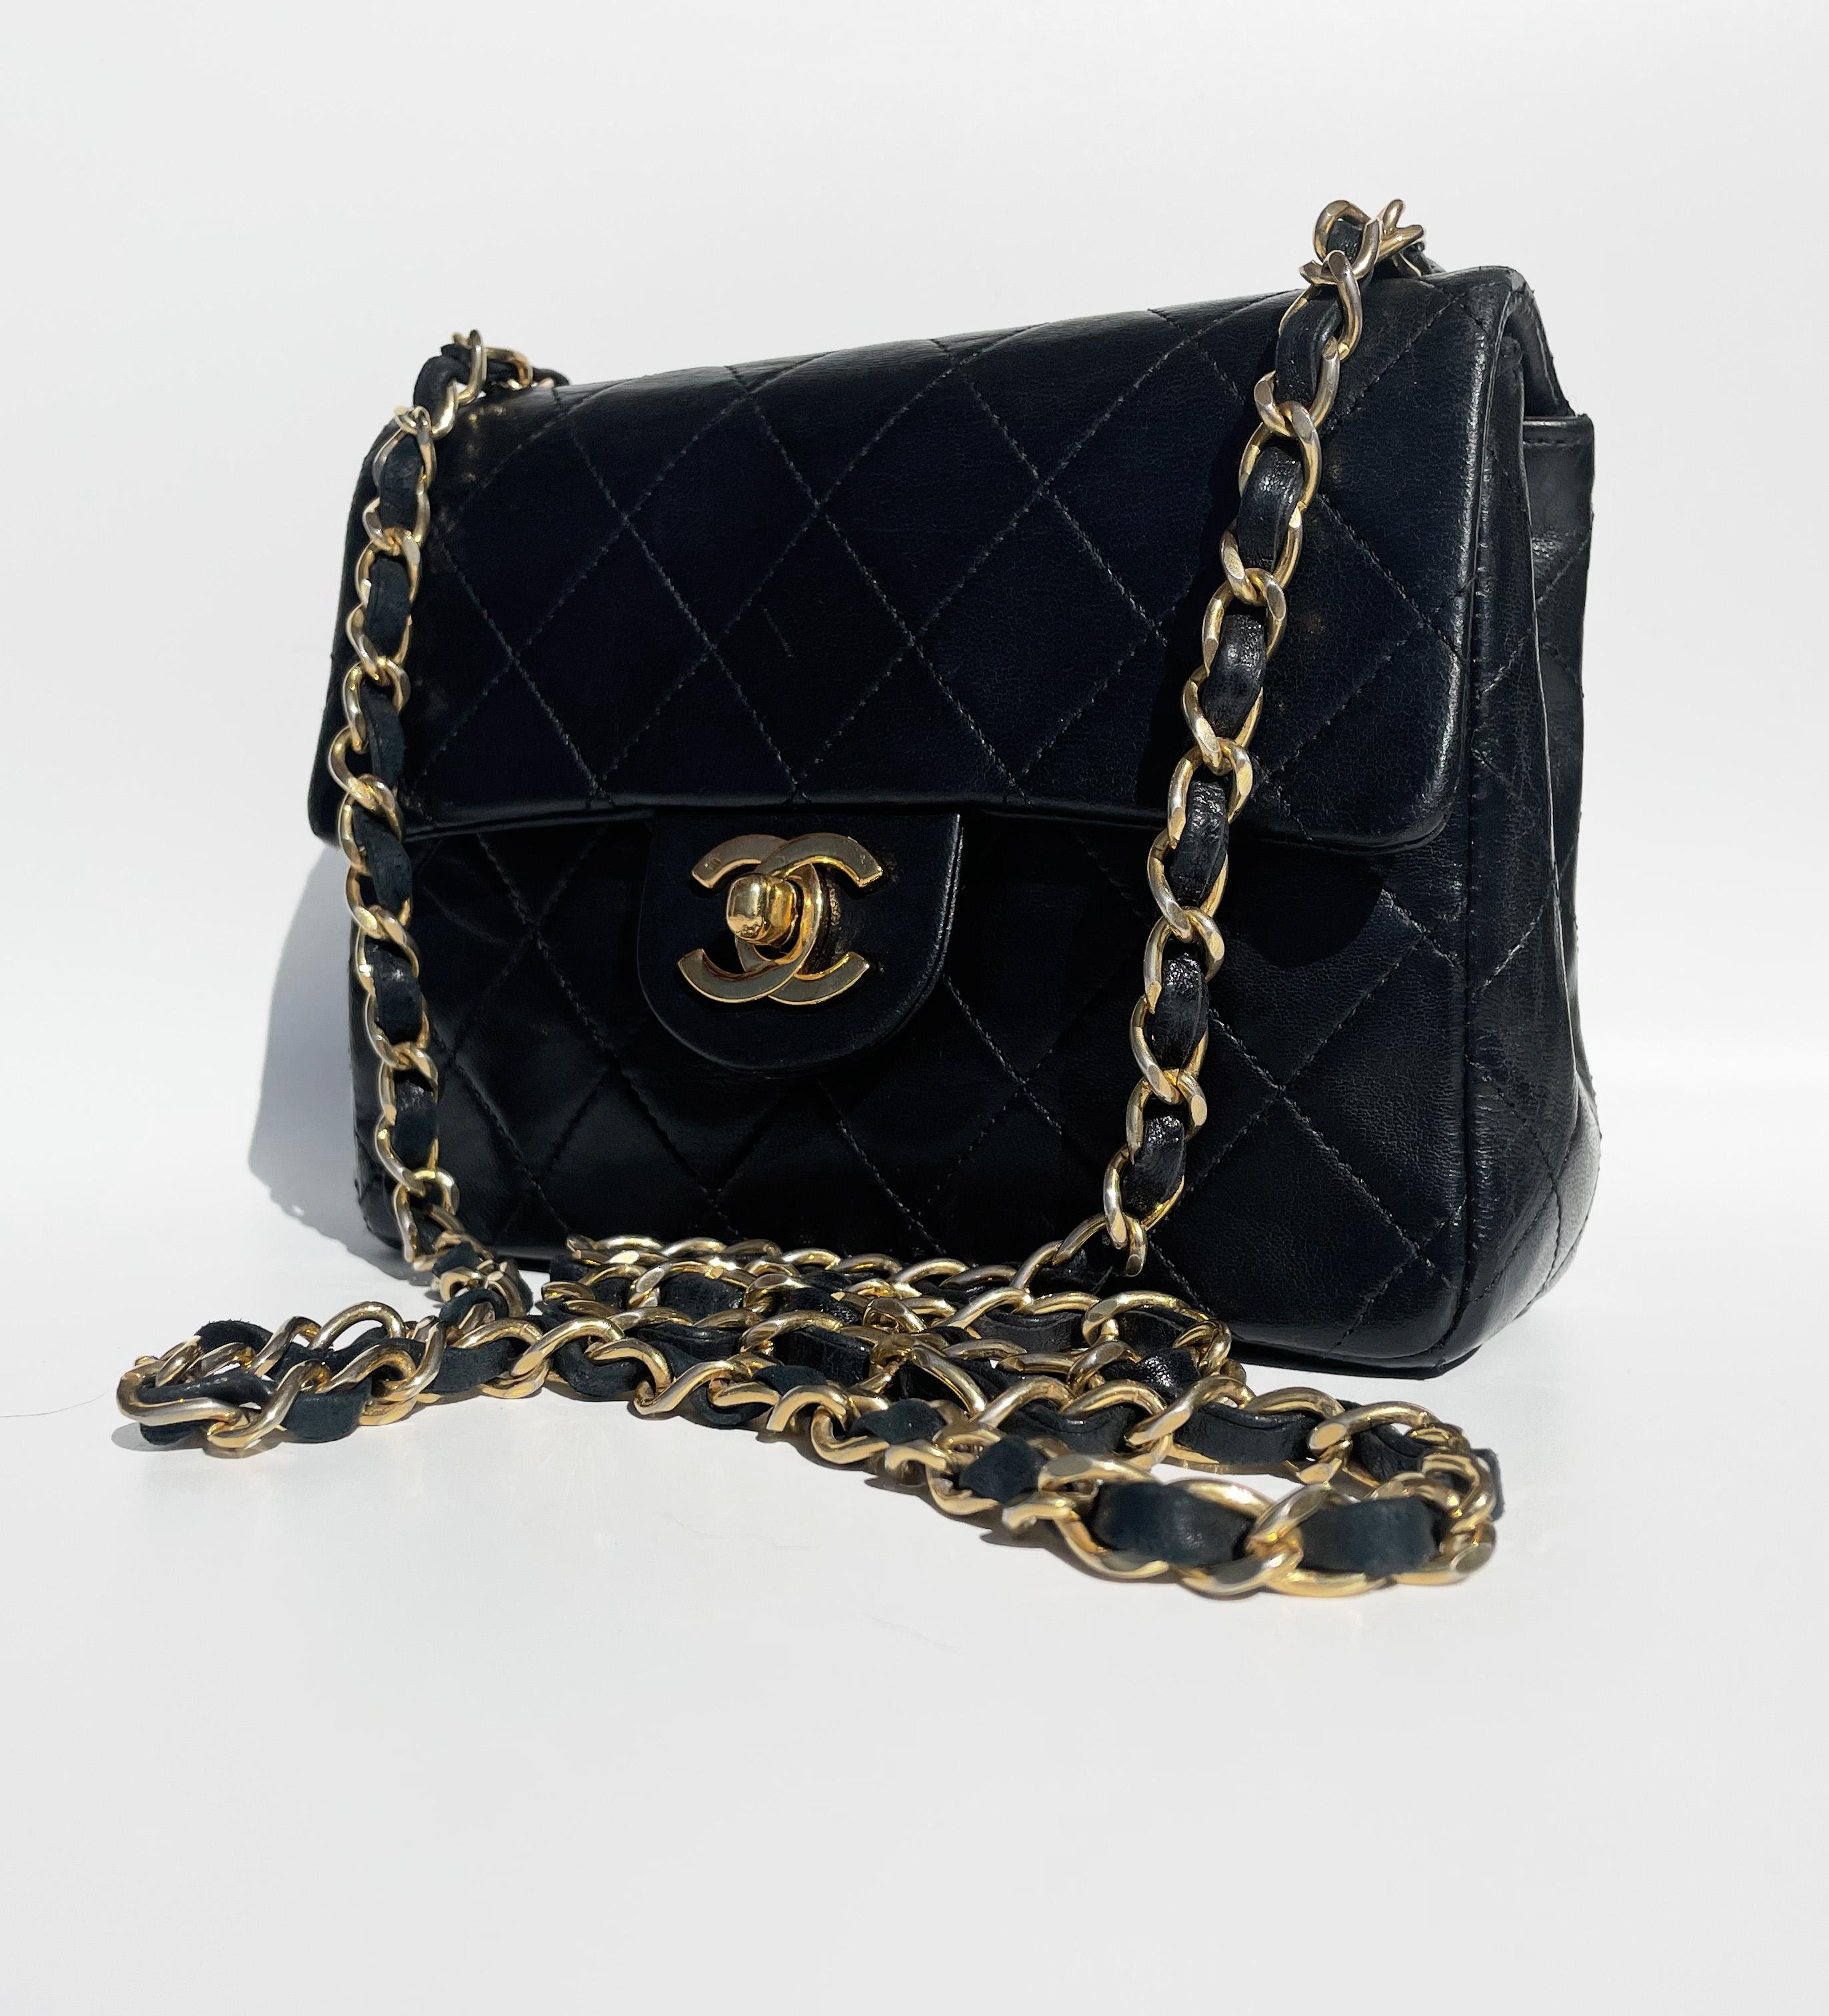 Classic Chanel Mini Timeless handbag in black quilted leather For Sale 1